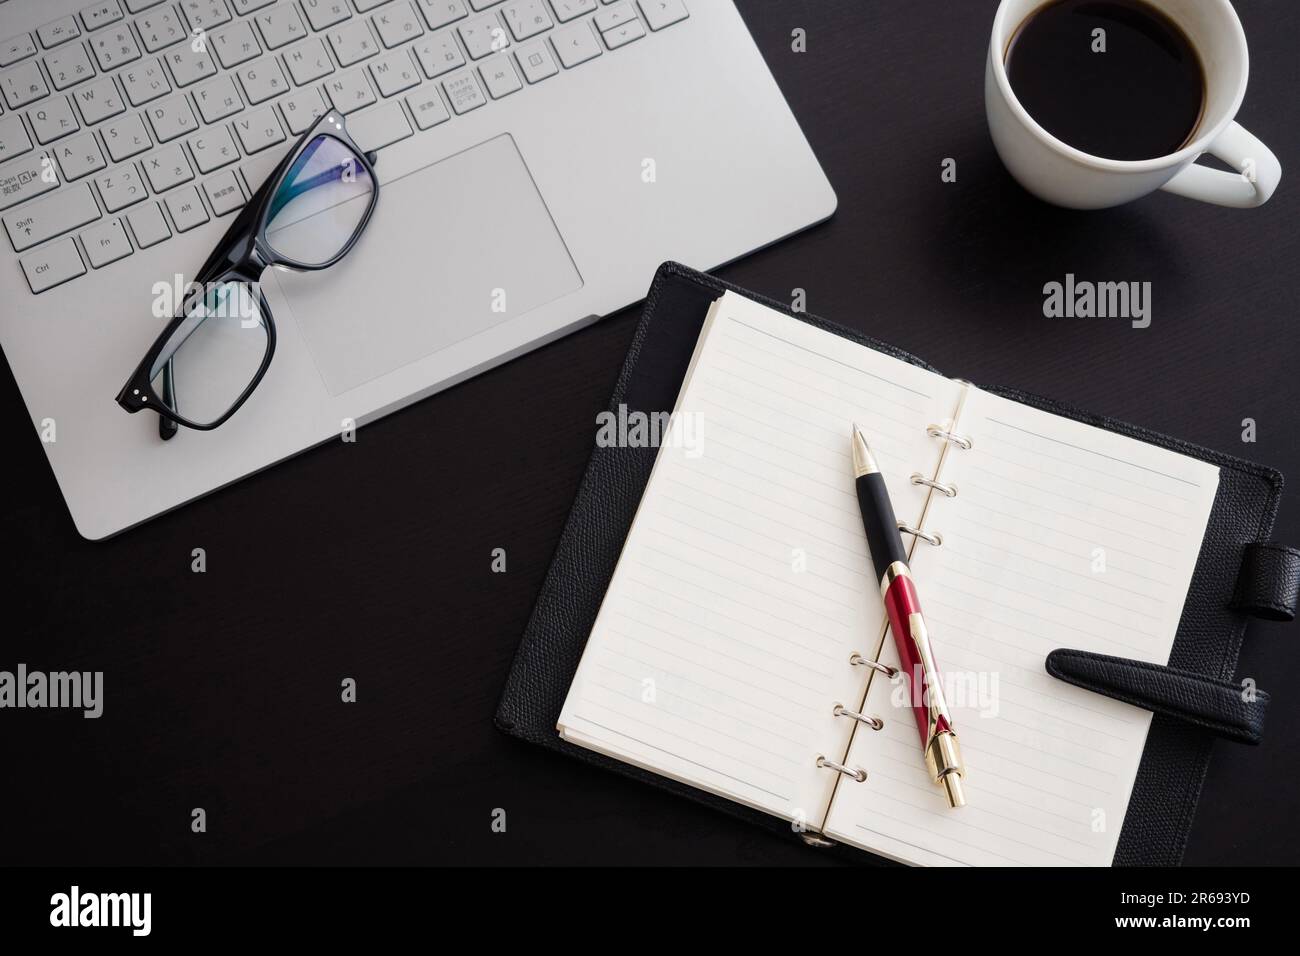 Business Items for Working from Home Stock Photo